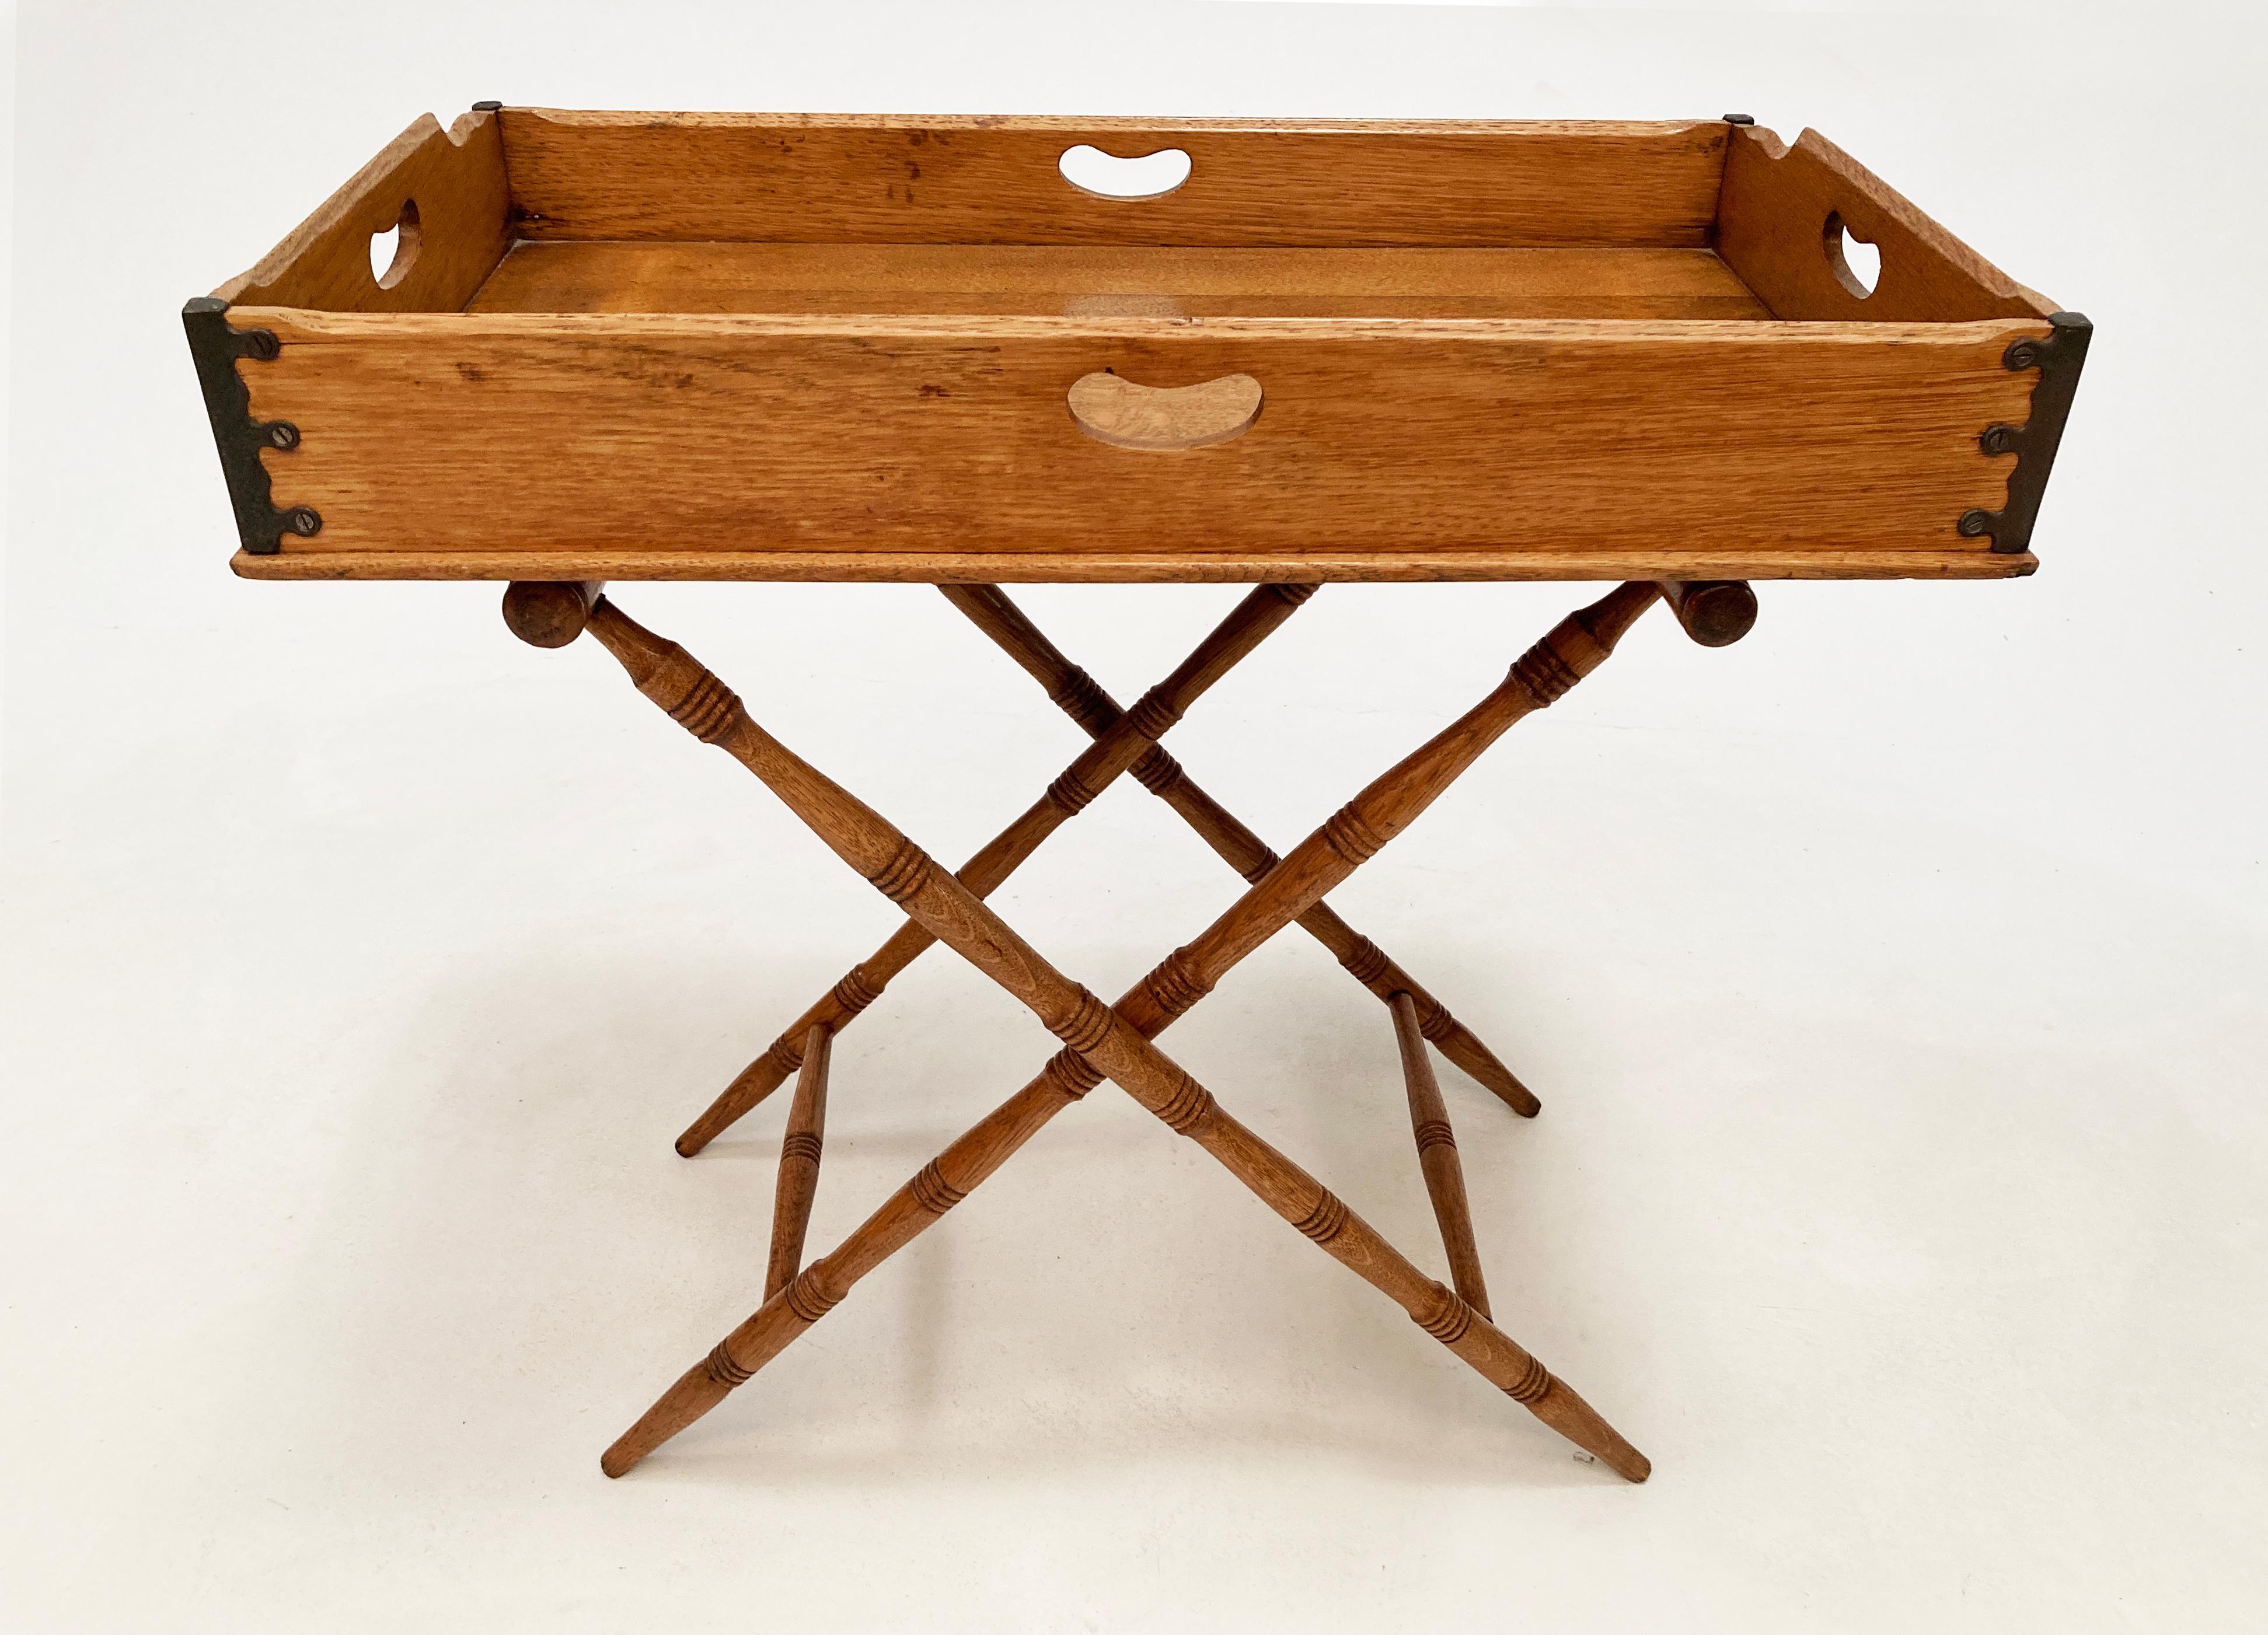 This rare tiger oak Butler's Tray with folding base, leather stand-straps and iron corners is a stunning example of smart functionality and beautiful design. This sturdy and uniquely figured oak tray is removable and features keyhole handles on all